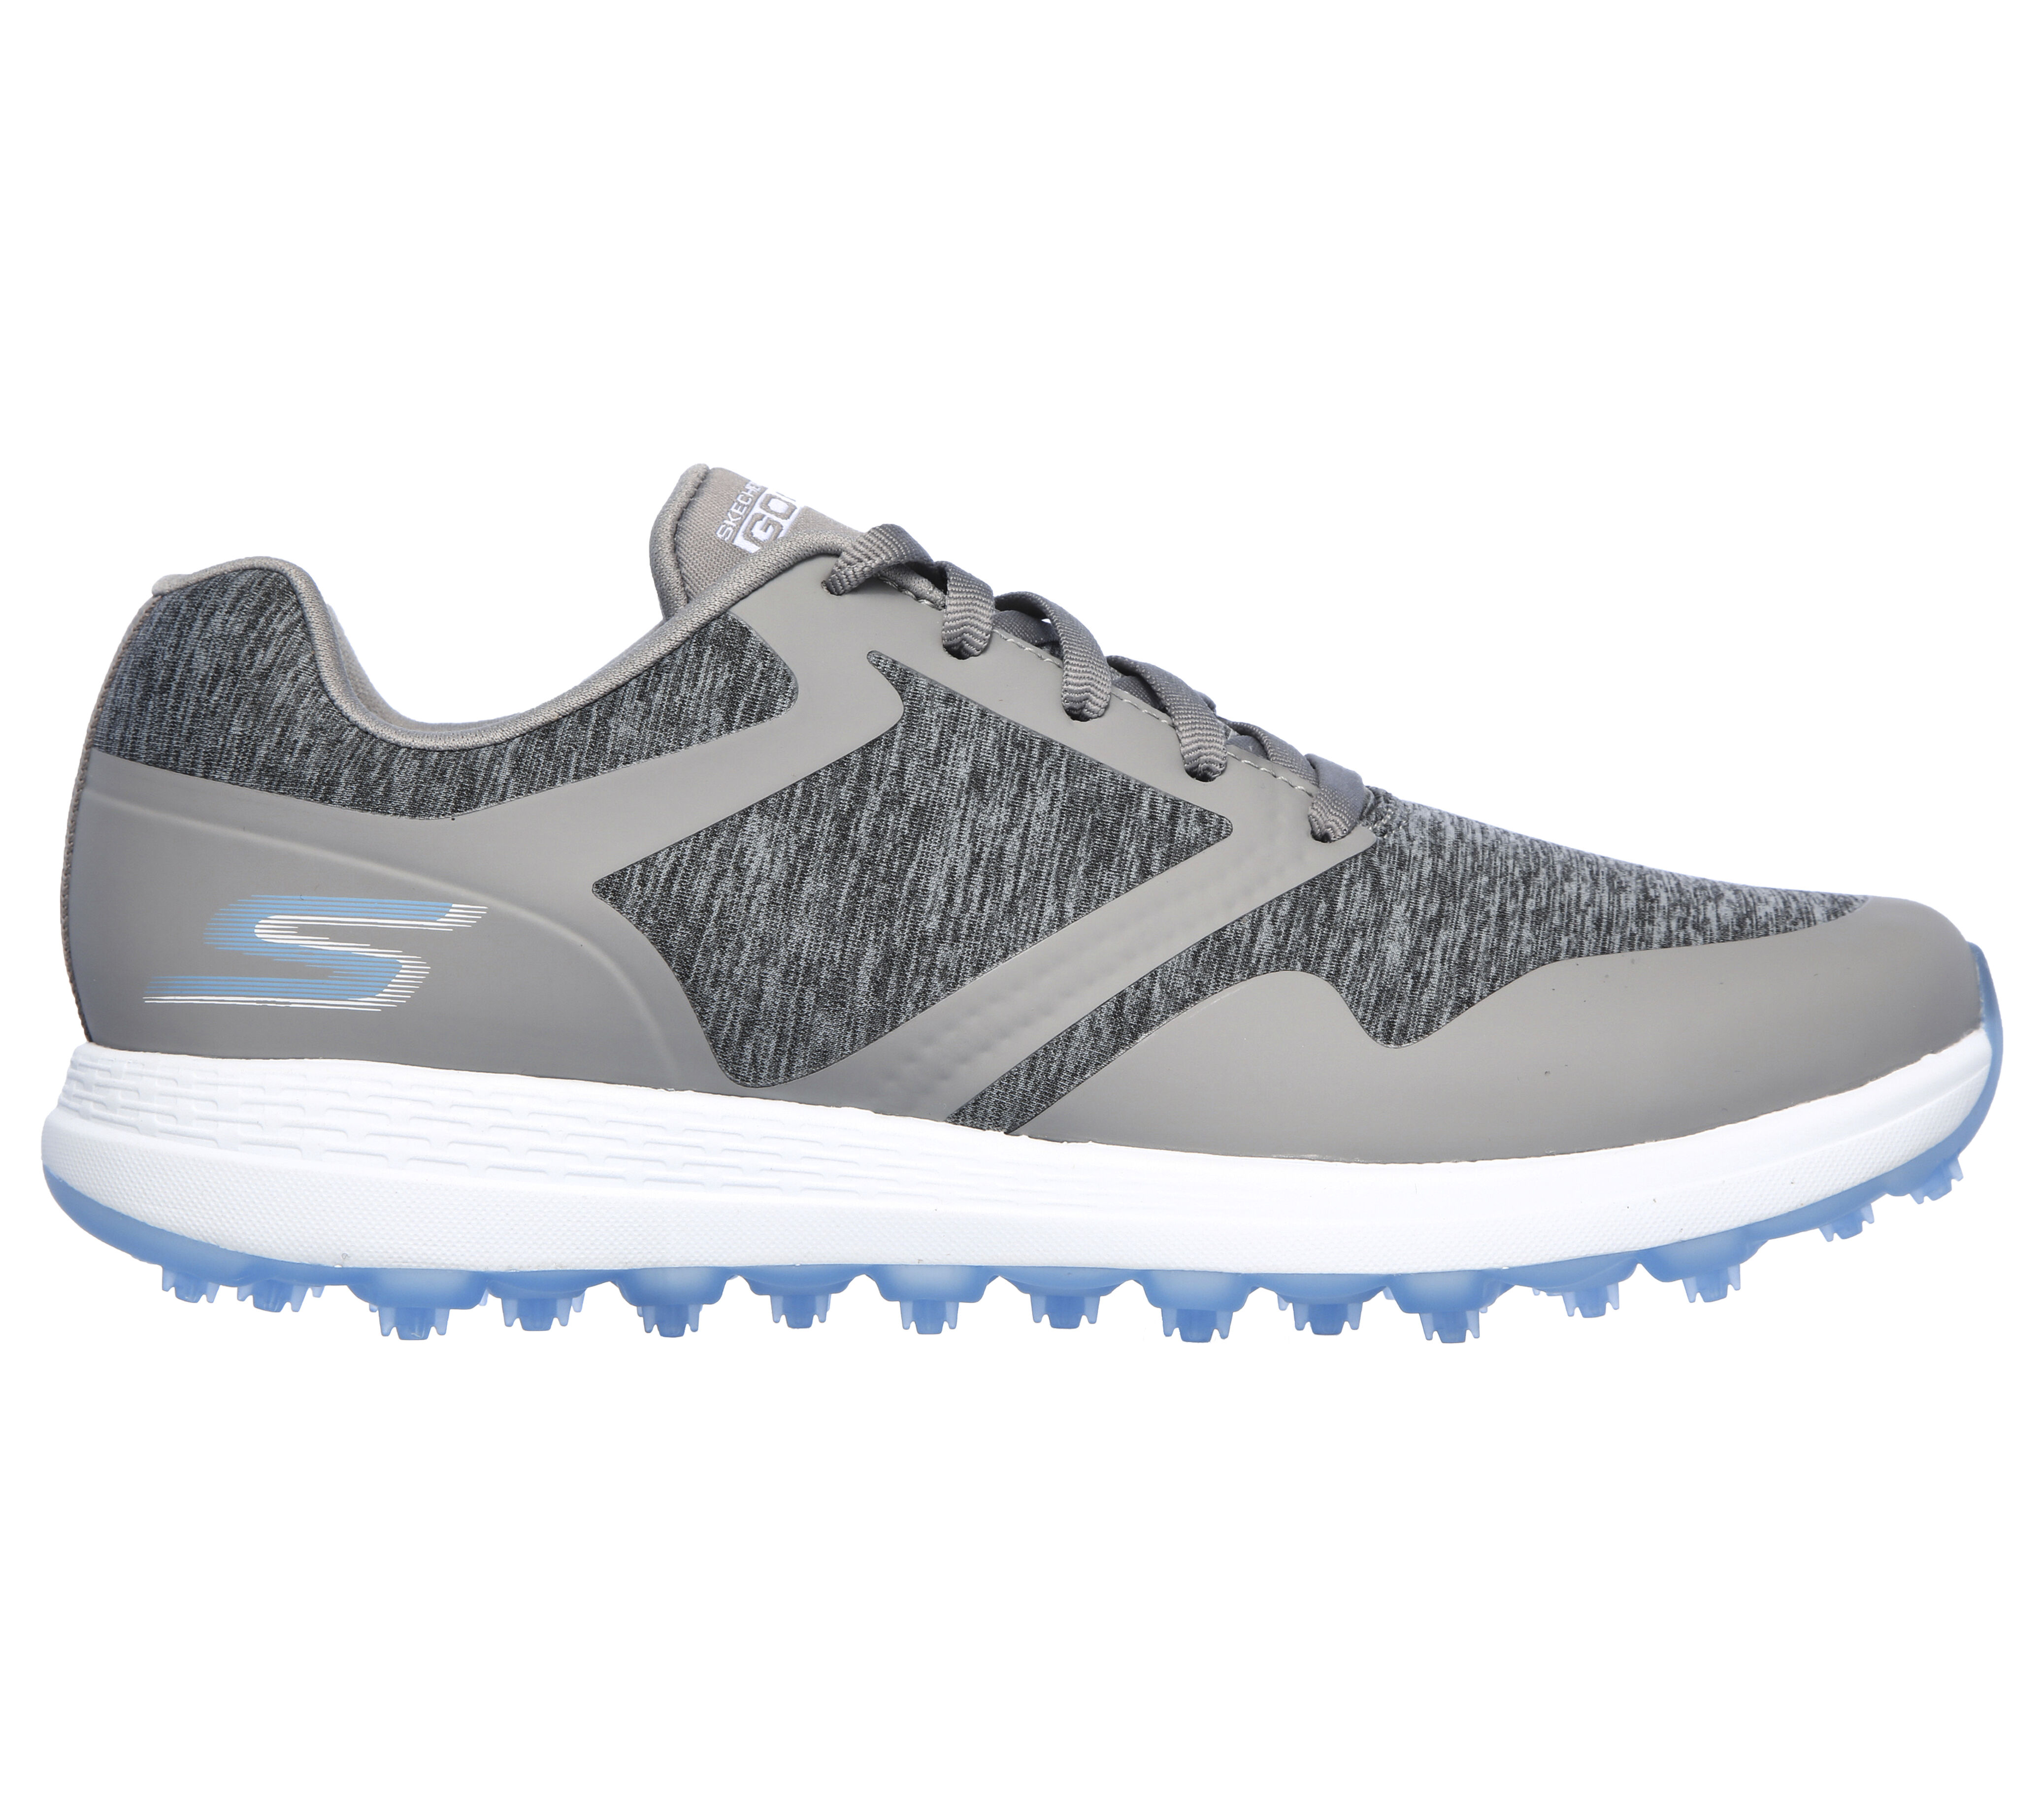 skechers golf shoes extra wide